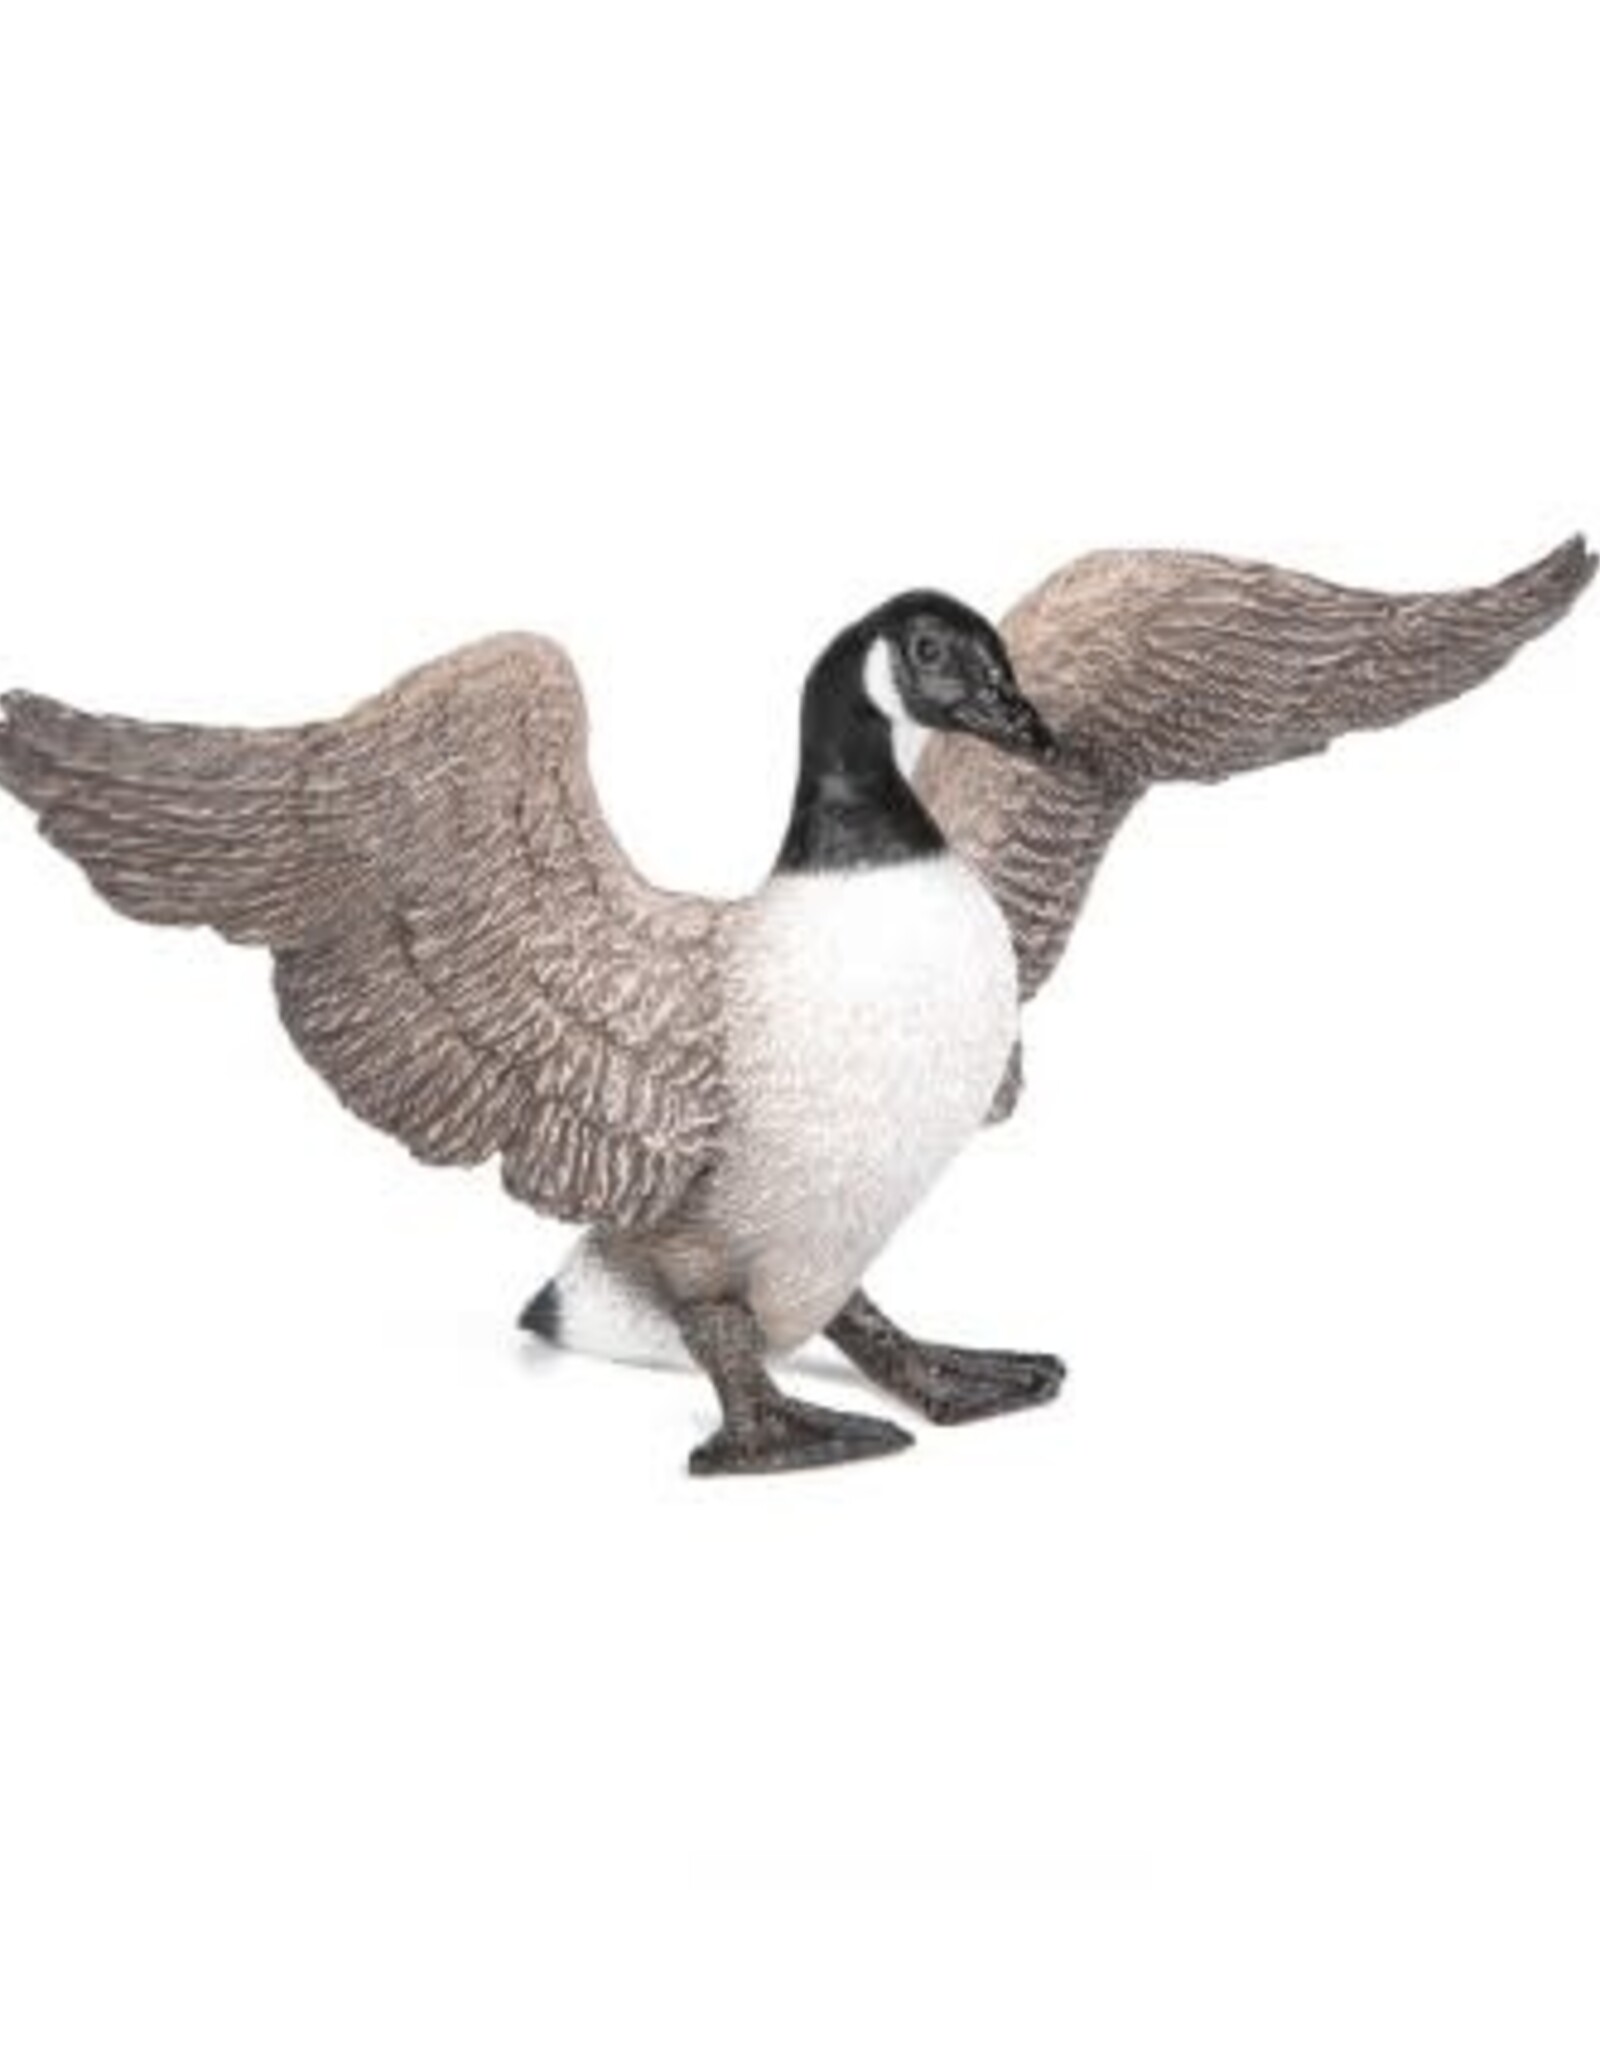 Hotaling PAPO: Canada Goose